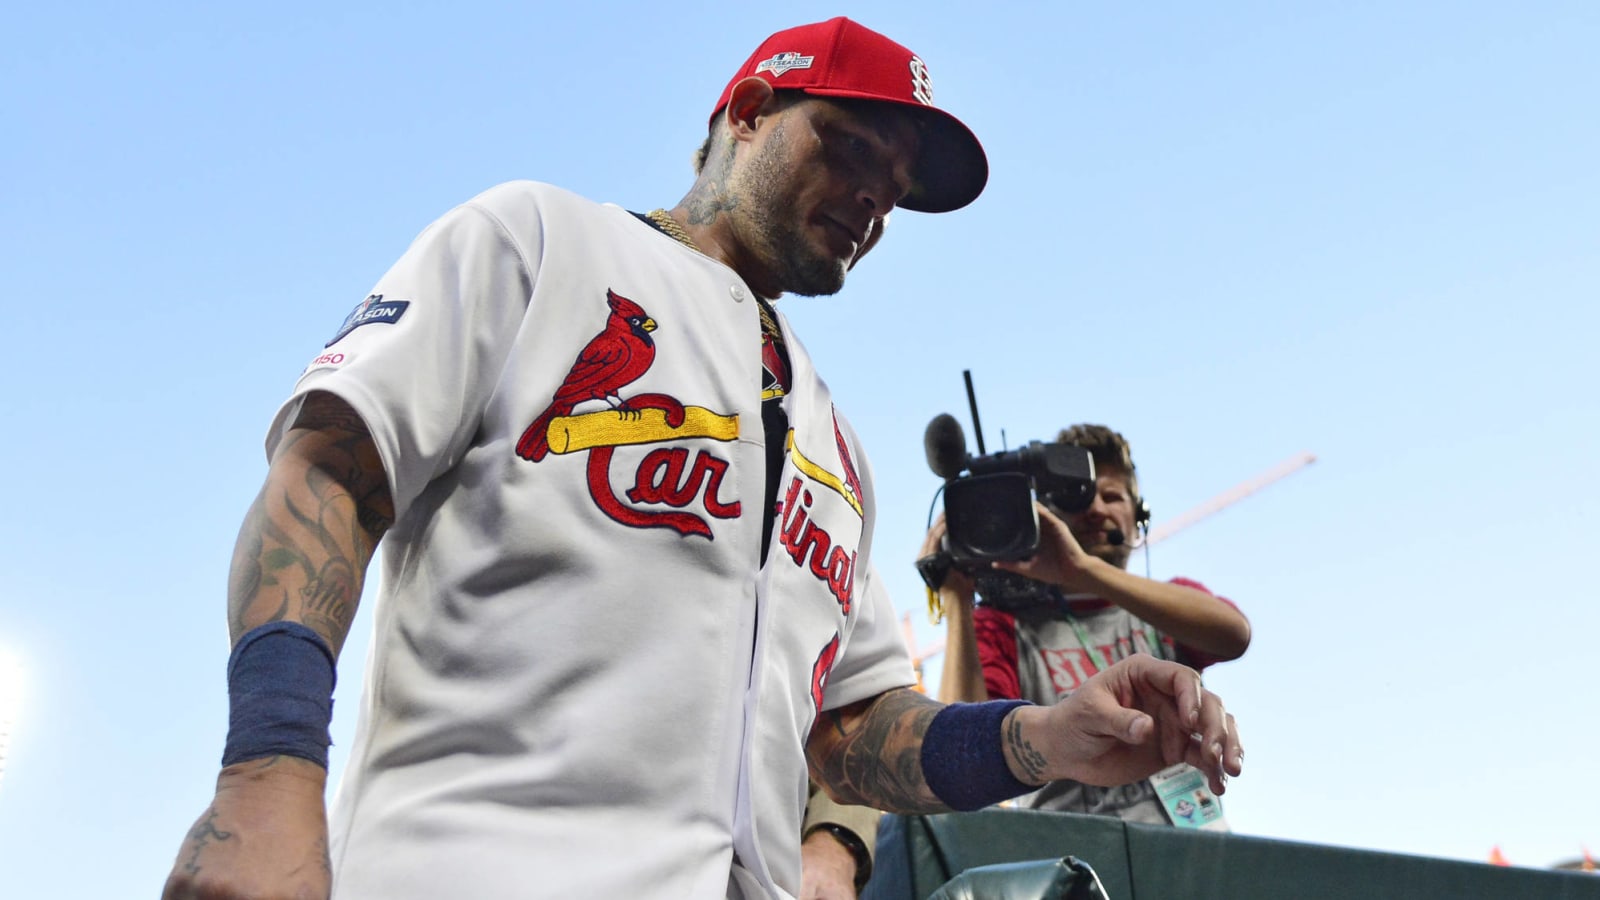 Molina launches bat, does throat slash after winning game for Cardinals